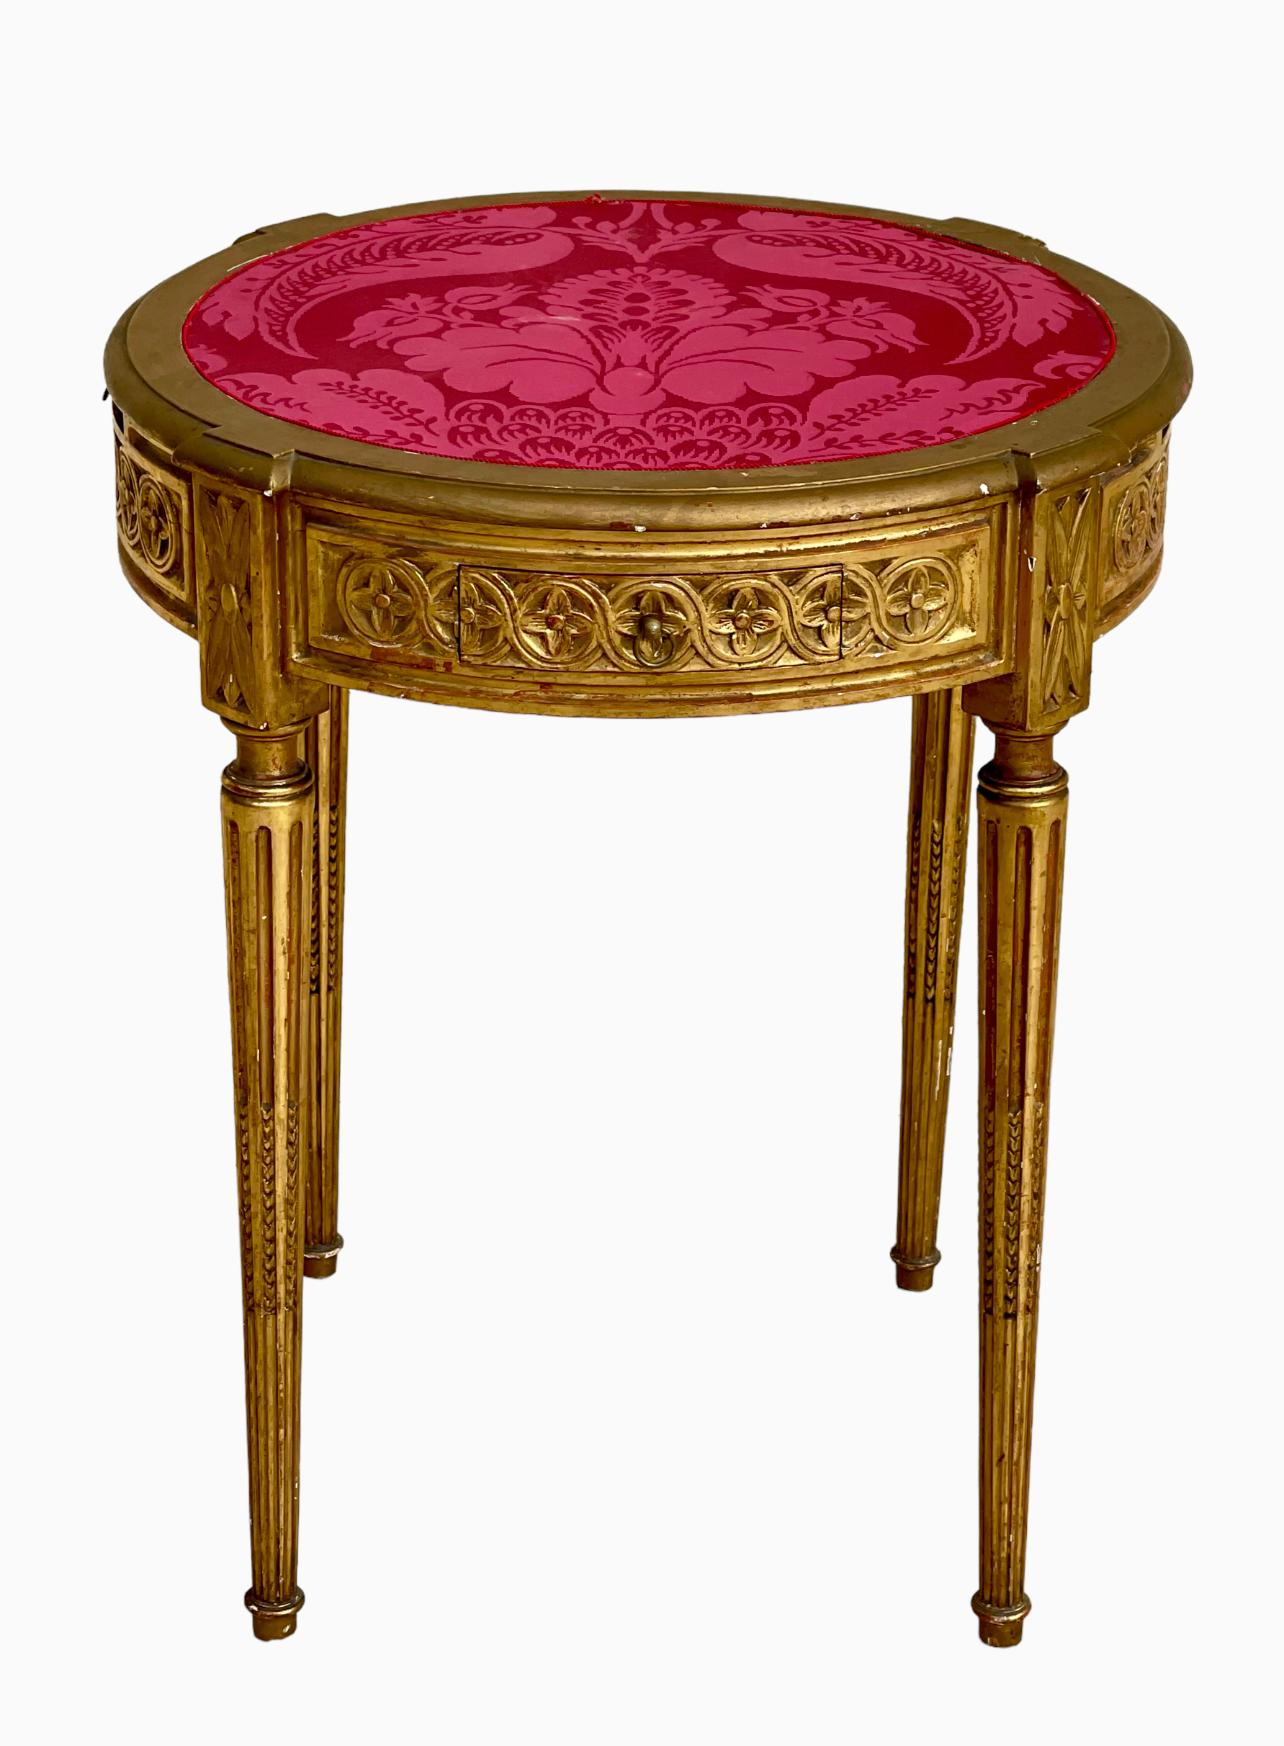 Louis XVI style gilded wood pedestal table composed of two pulls and two drawers around the edge. The top is covered with red fabric. Circa 1920.

Dimensions
Hauteur 70,5cm
Diamètre 60cm